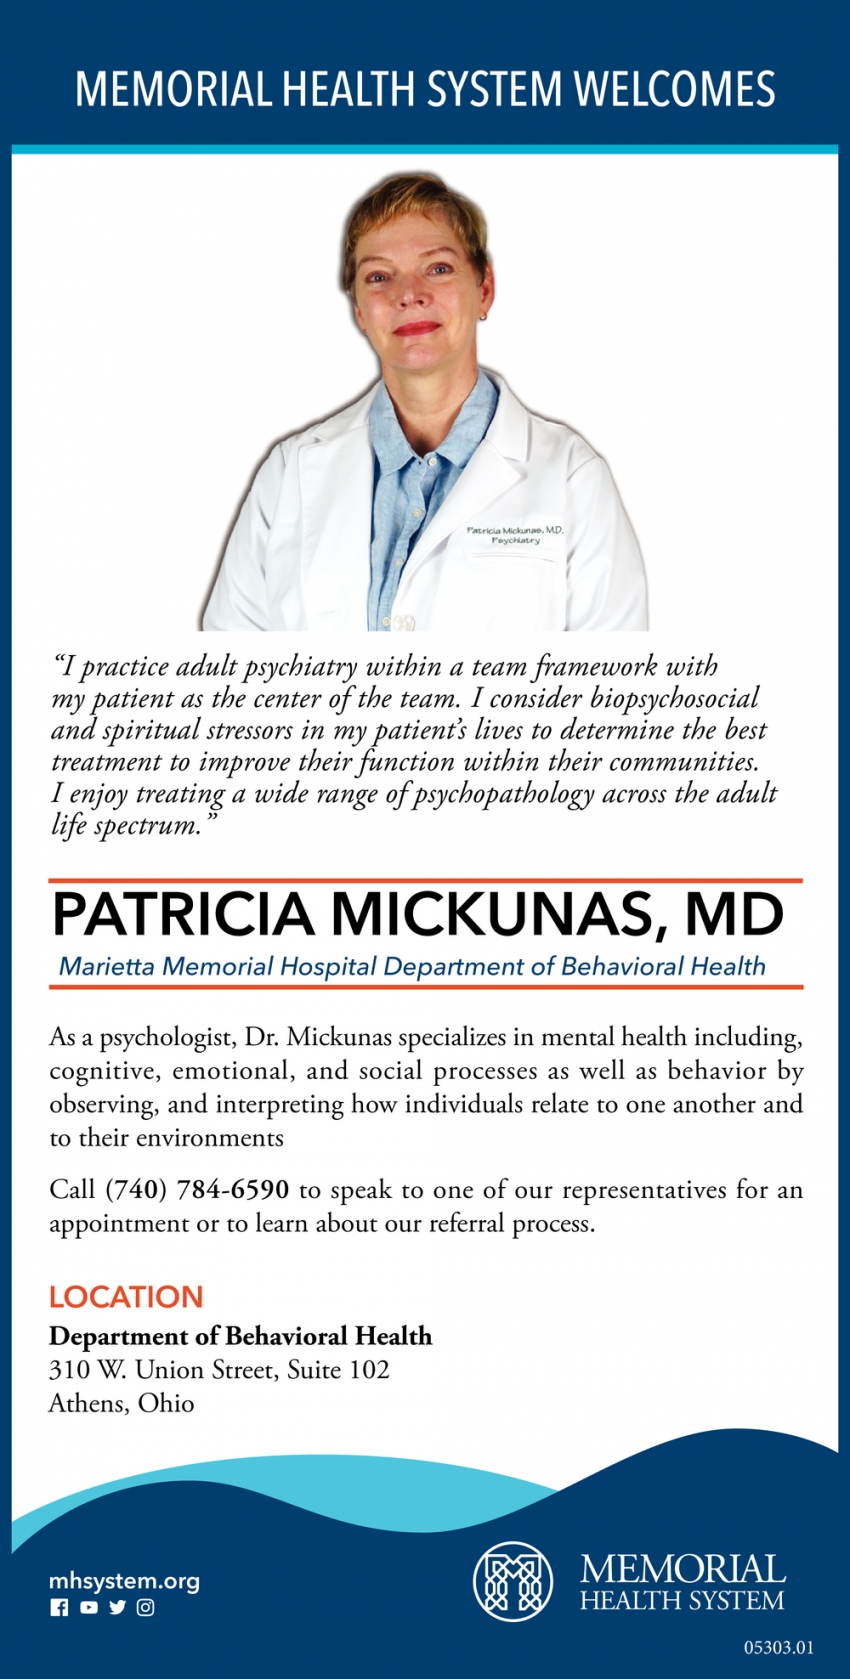 Memorial Health System Welcomes Patricia Mickunas, MD